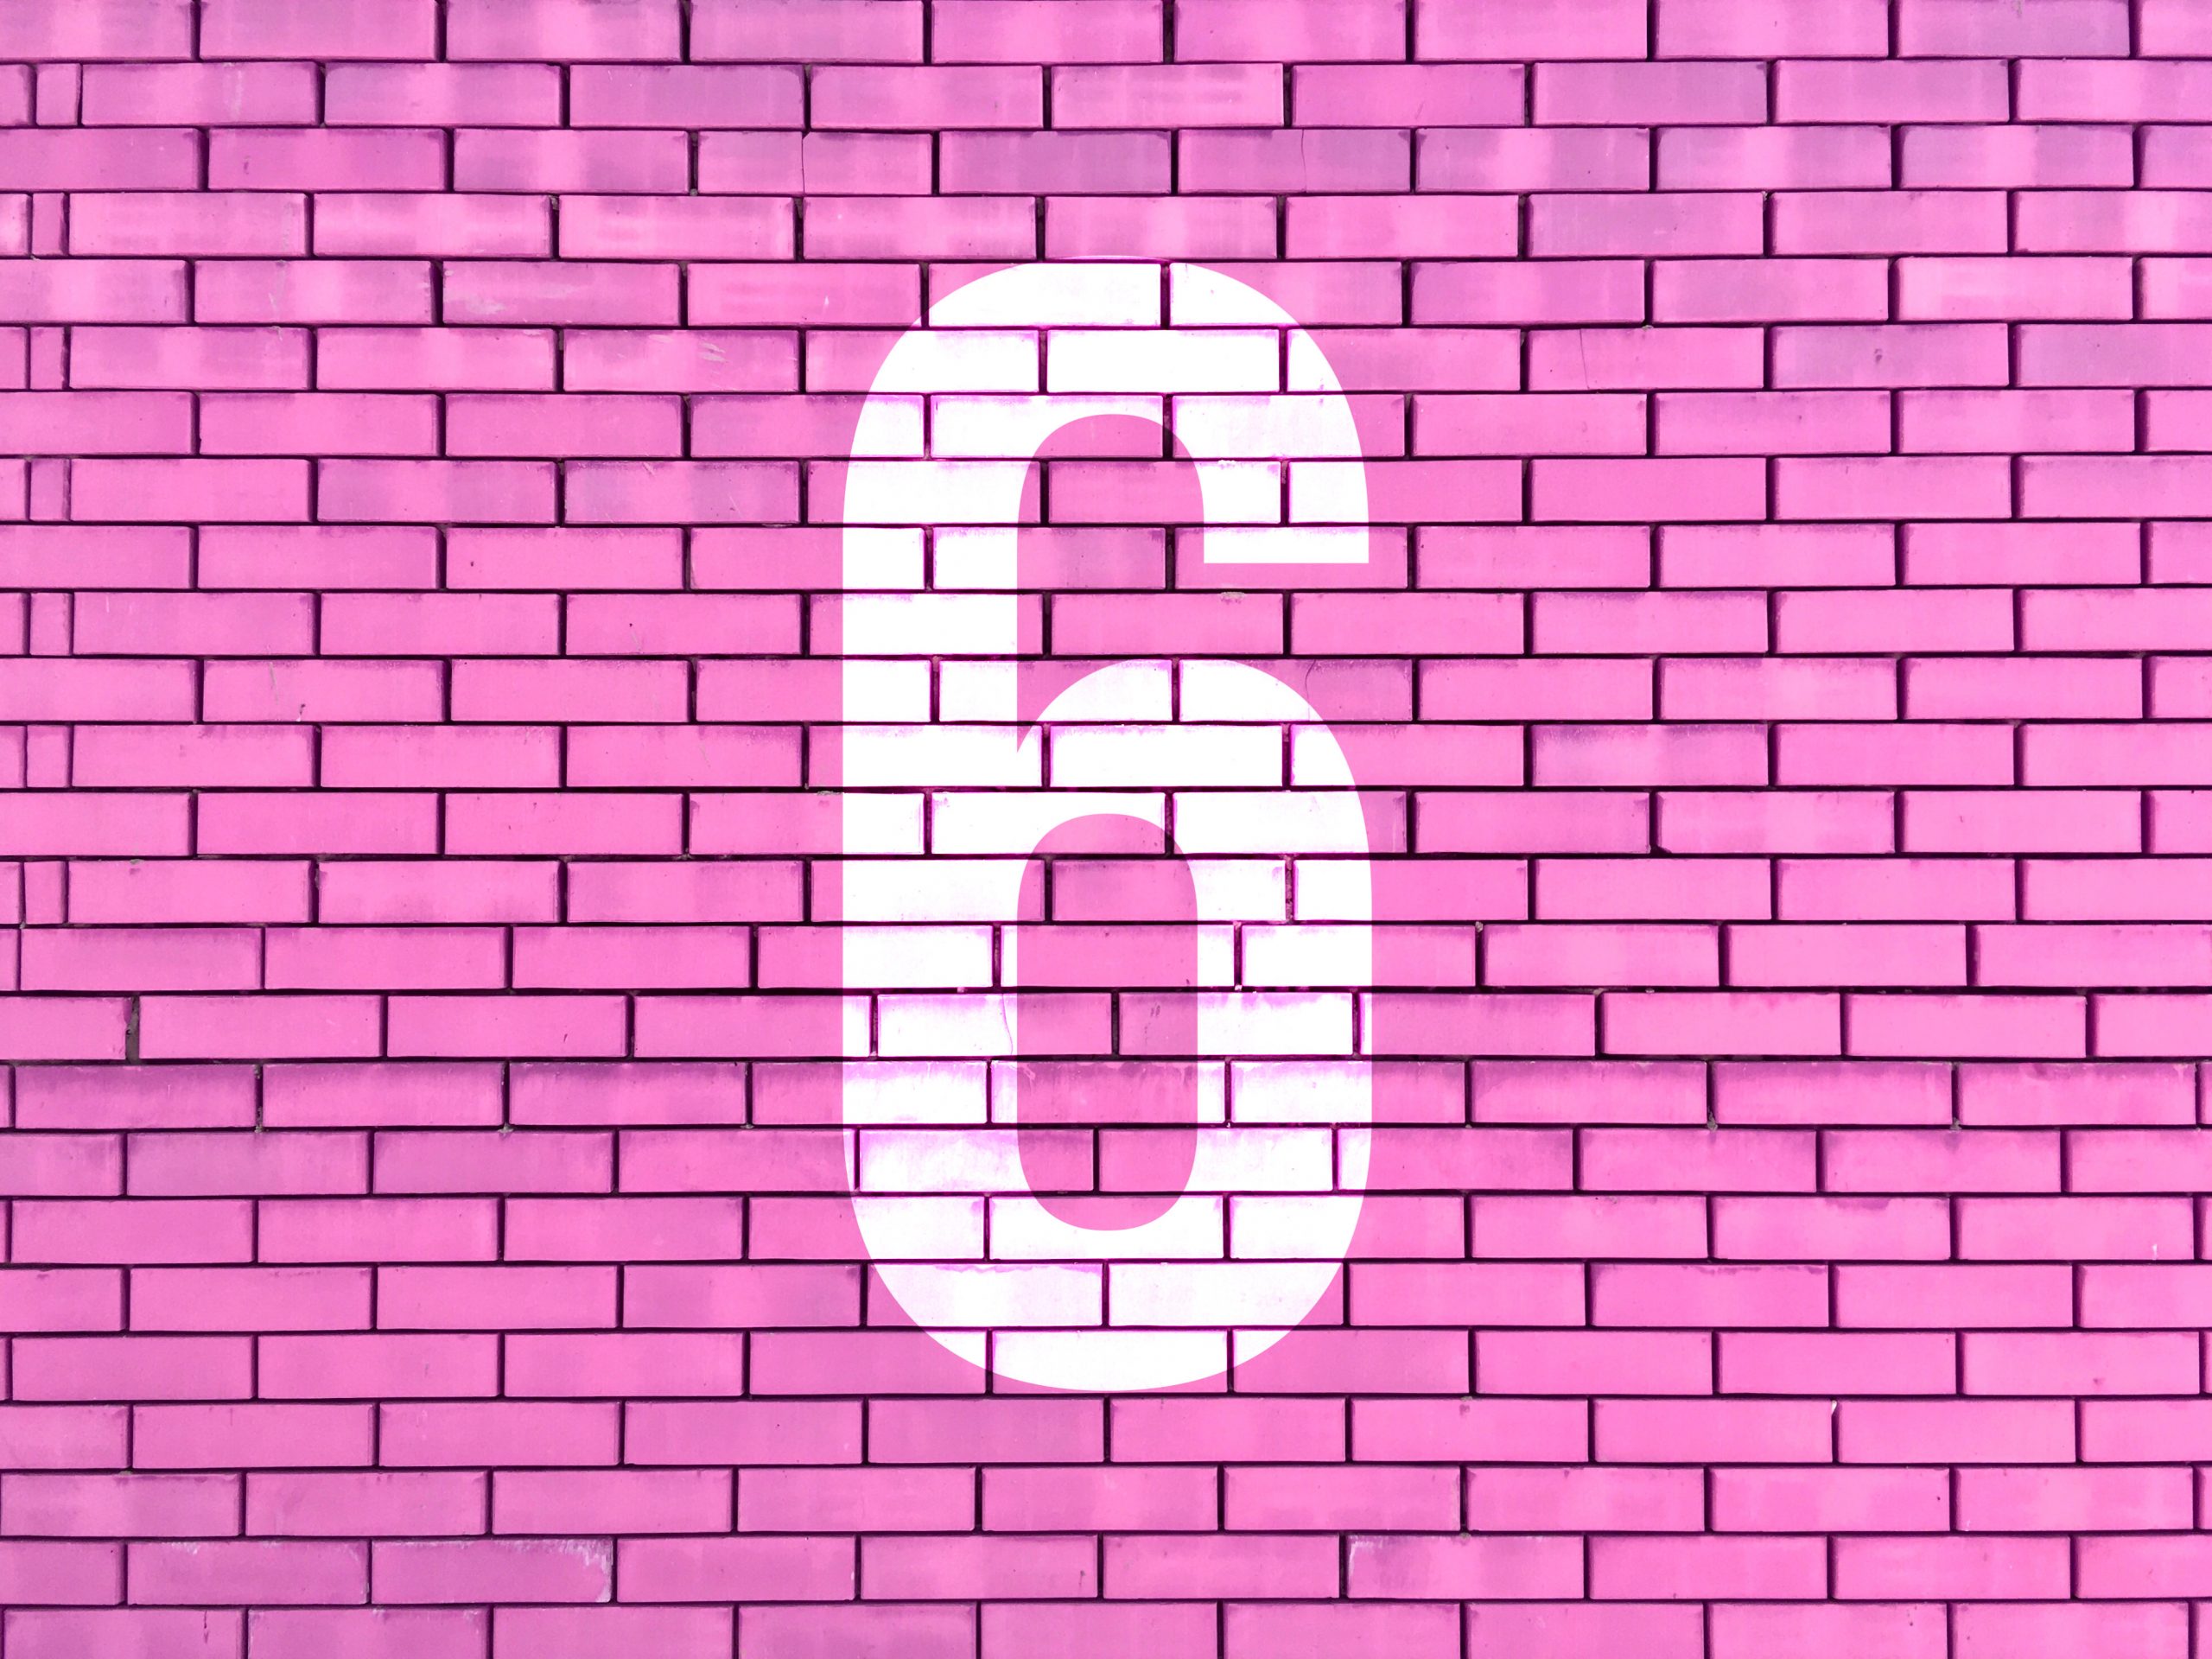 number six overlayed on pink brick background